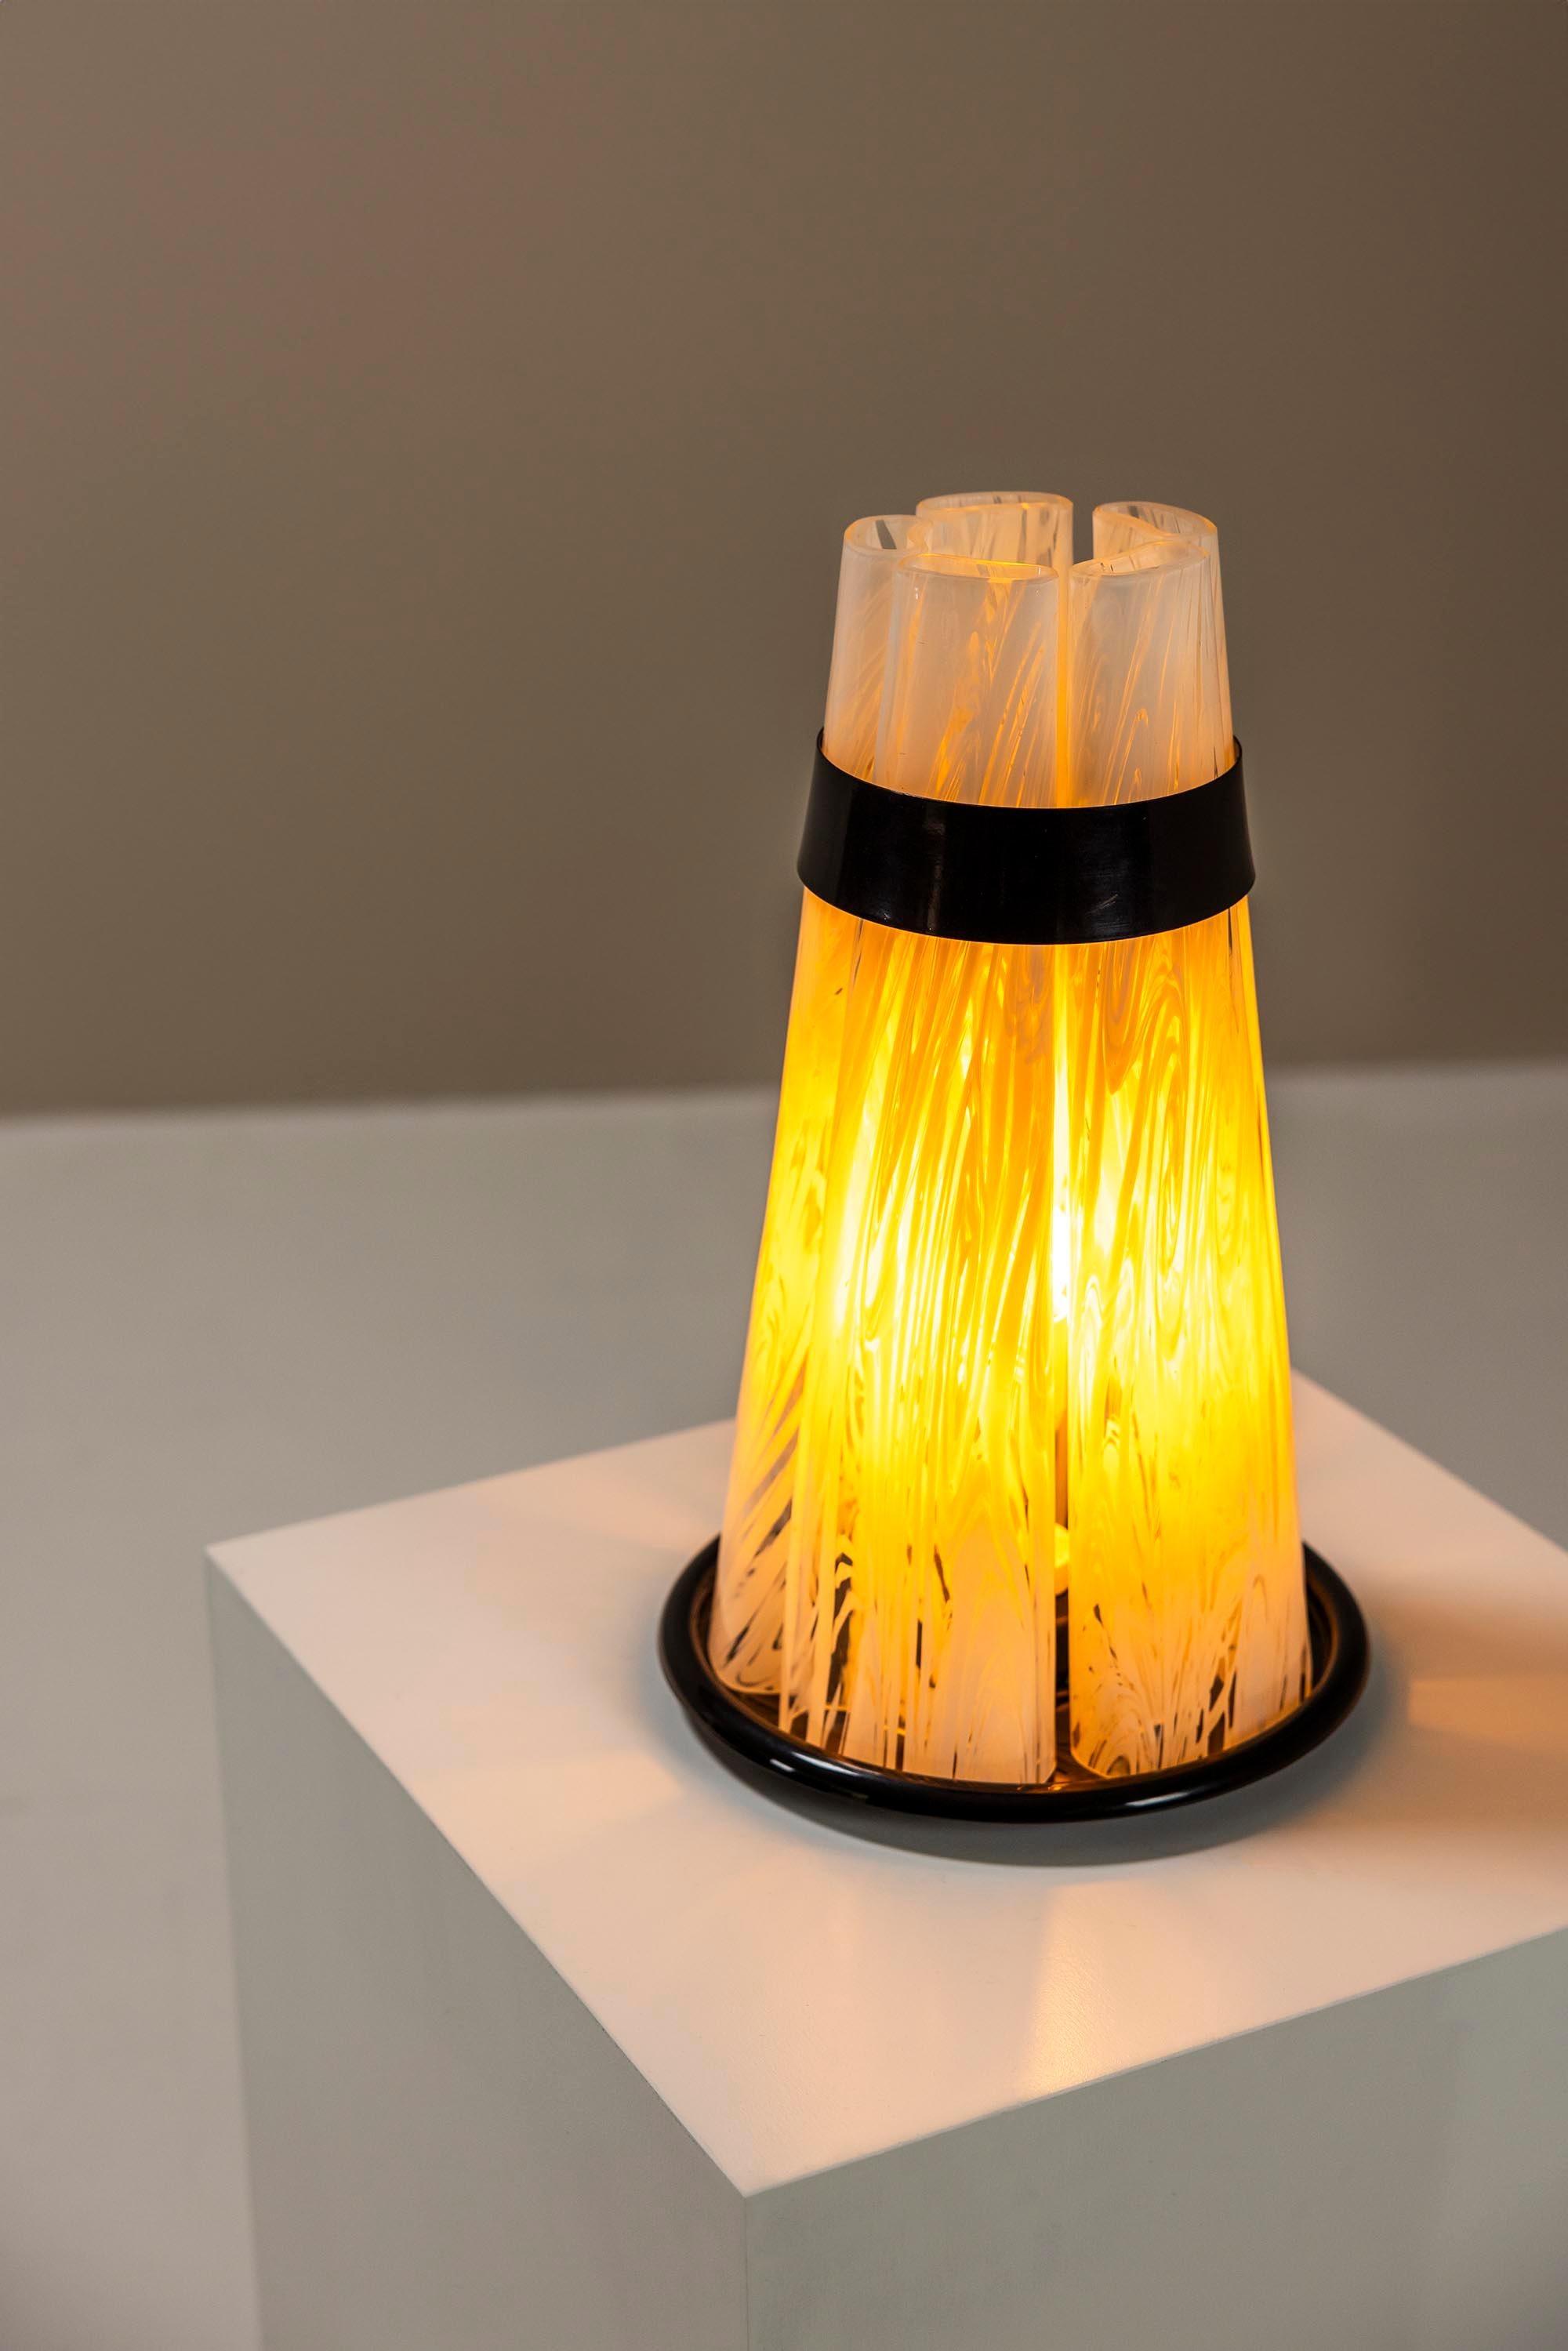 Late 20th Century Table Lamp “Bricola” In Murano By Federica Marangoni For ITRE, Italy 1975